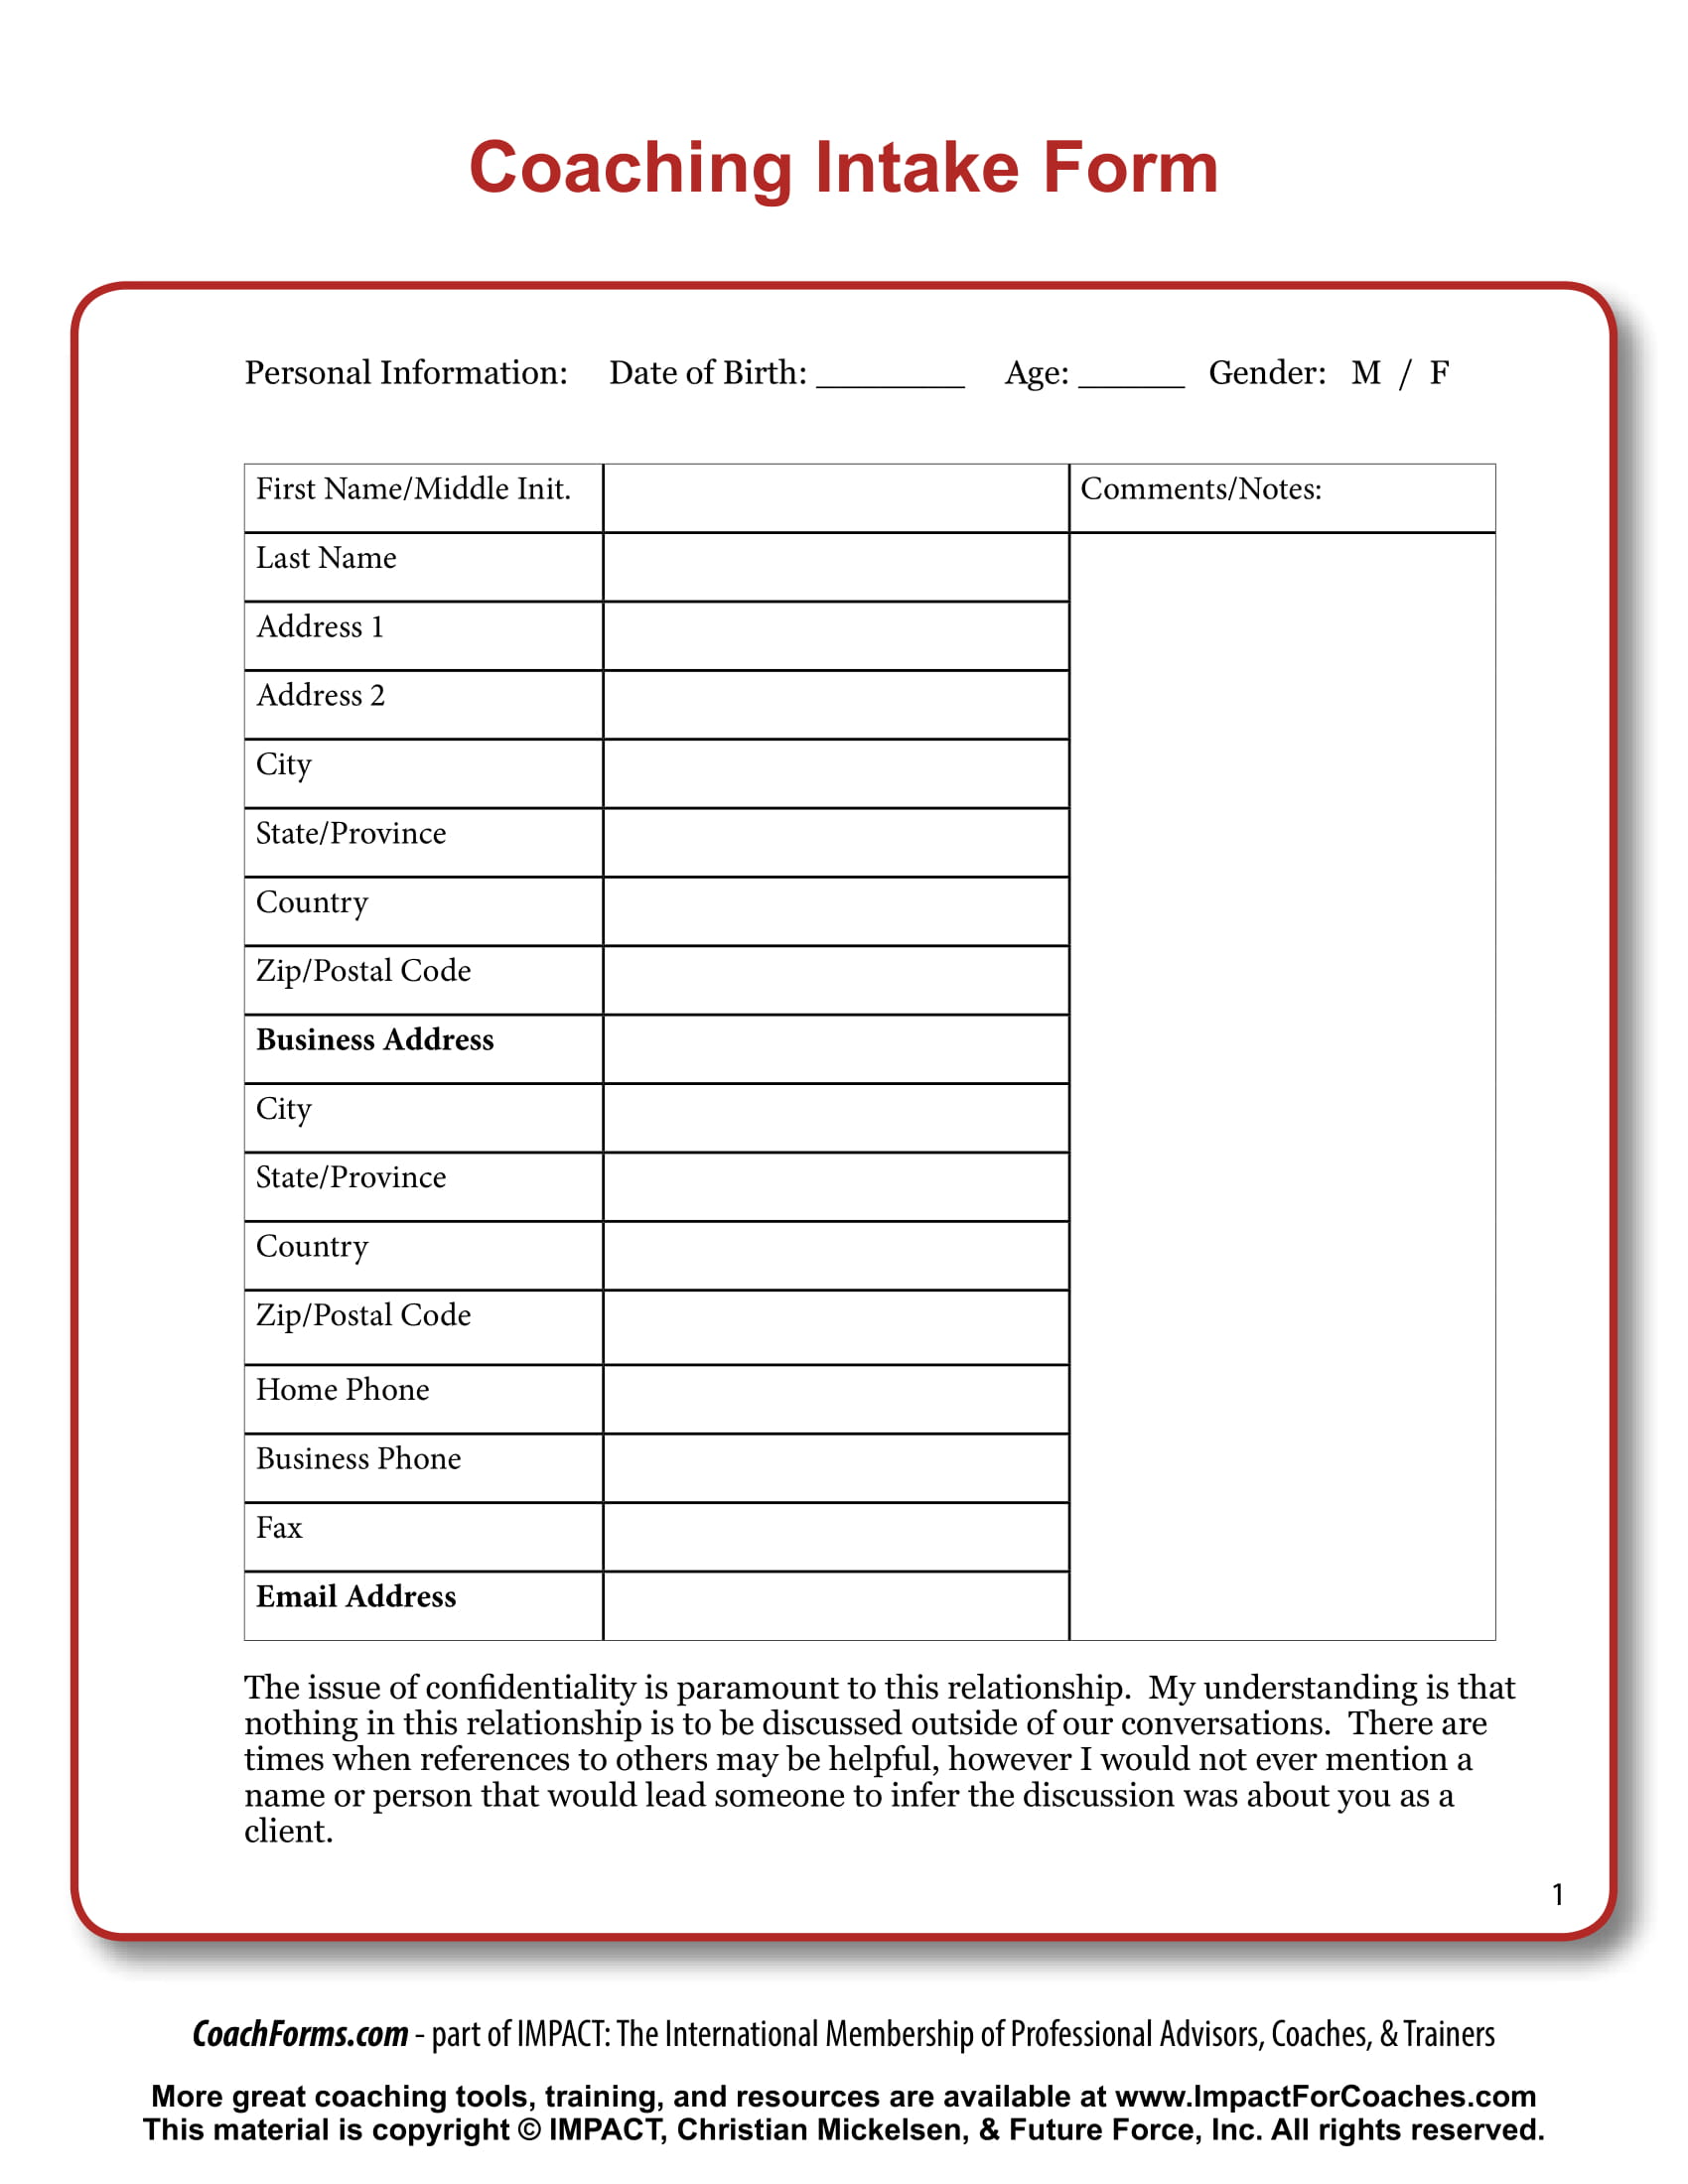 Coaching Intake Form Template Master of Documents